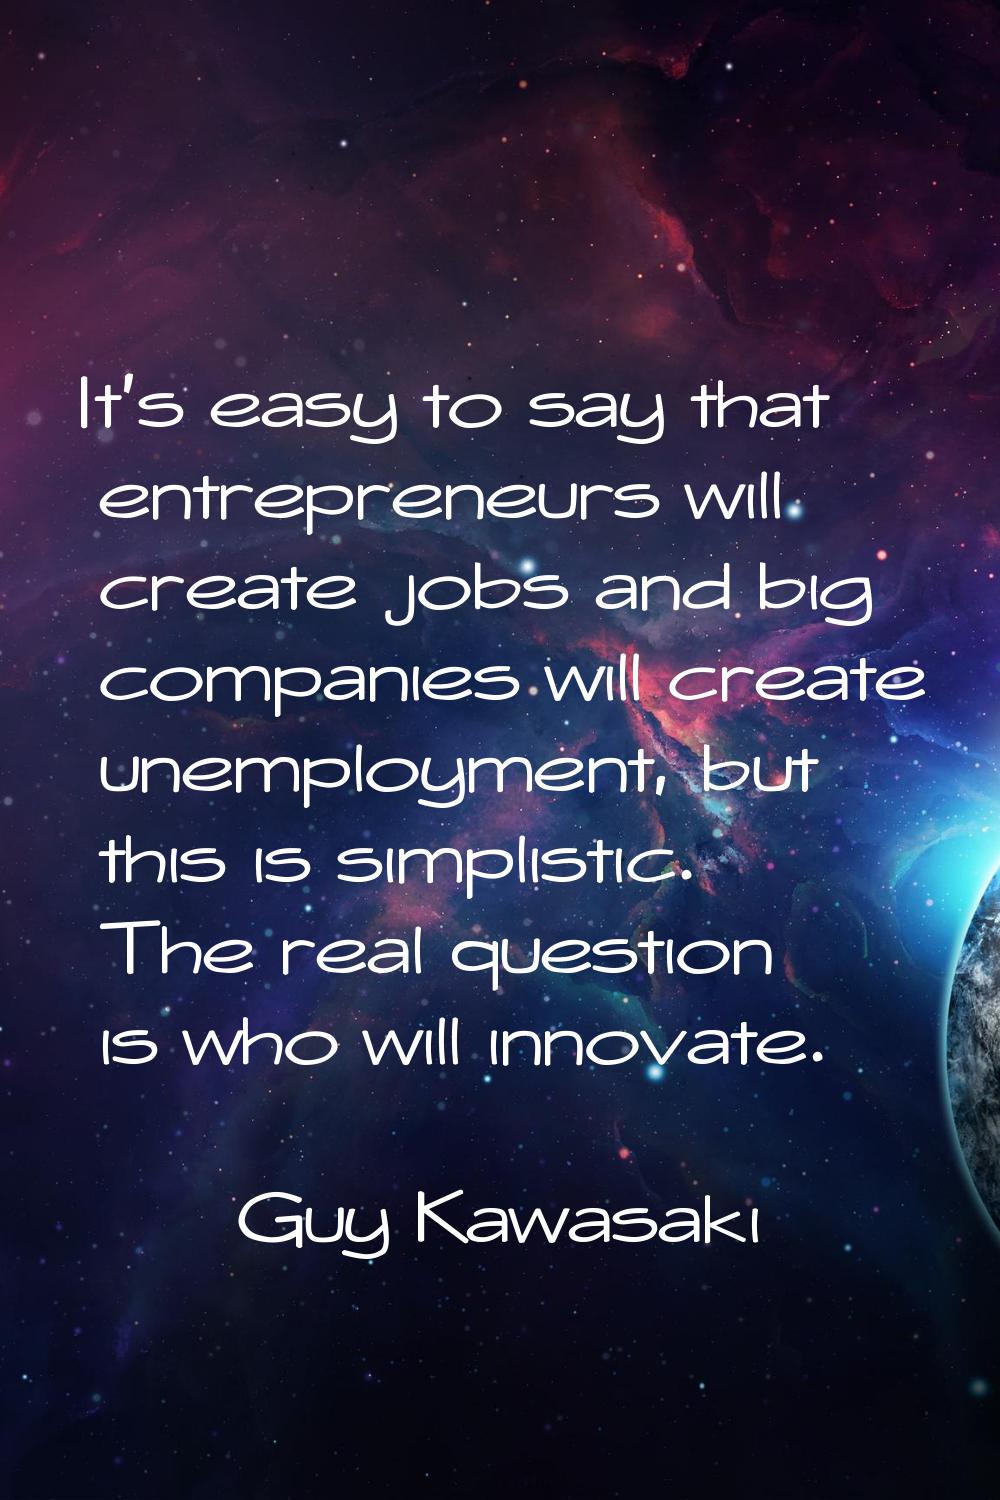 It's easy to say that entrepreneurs will create jobs and big companies will create unemployment, bu